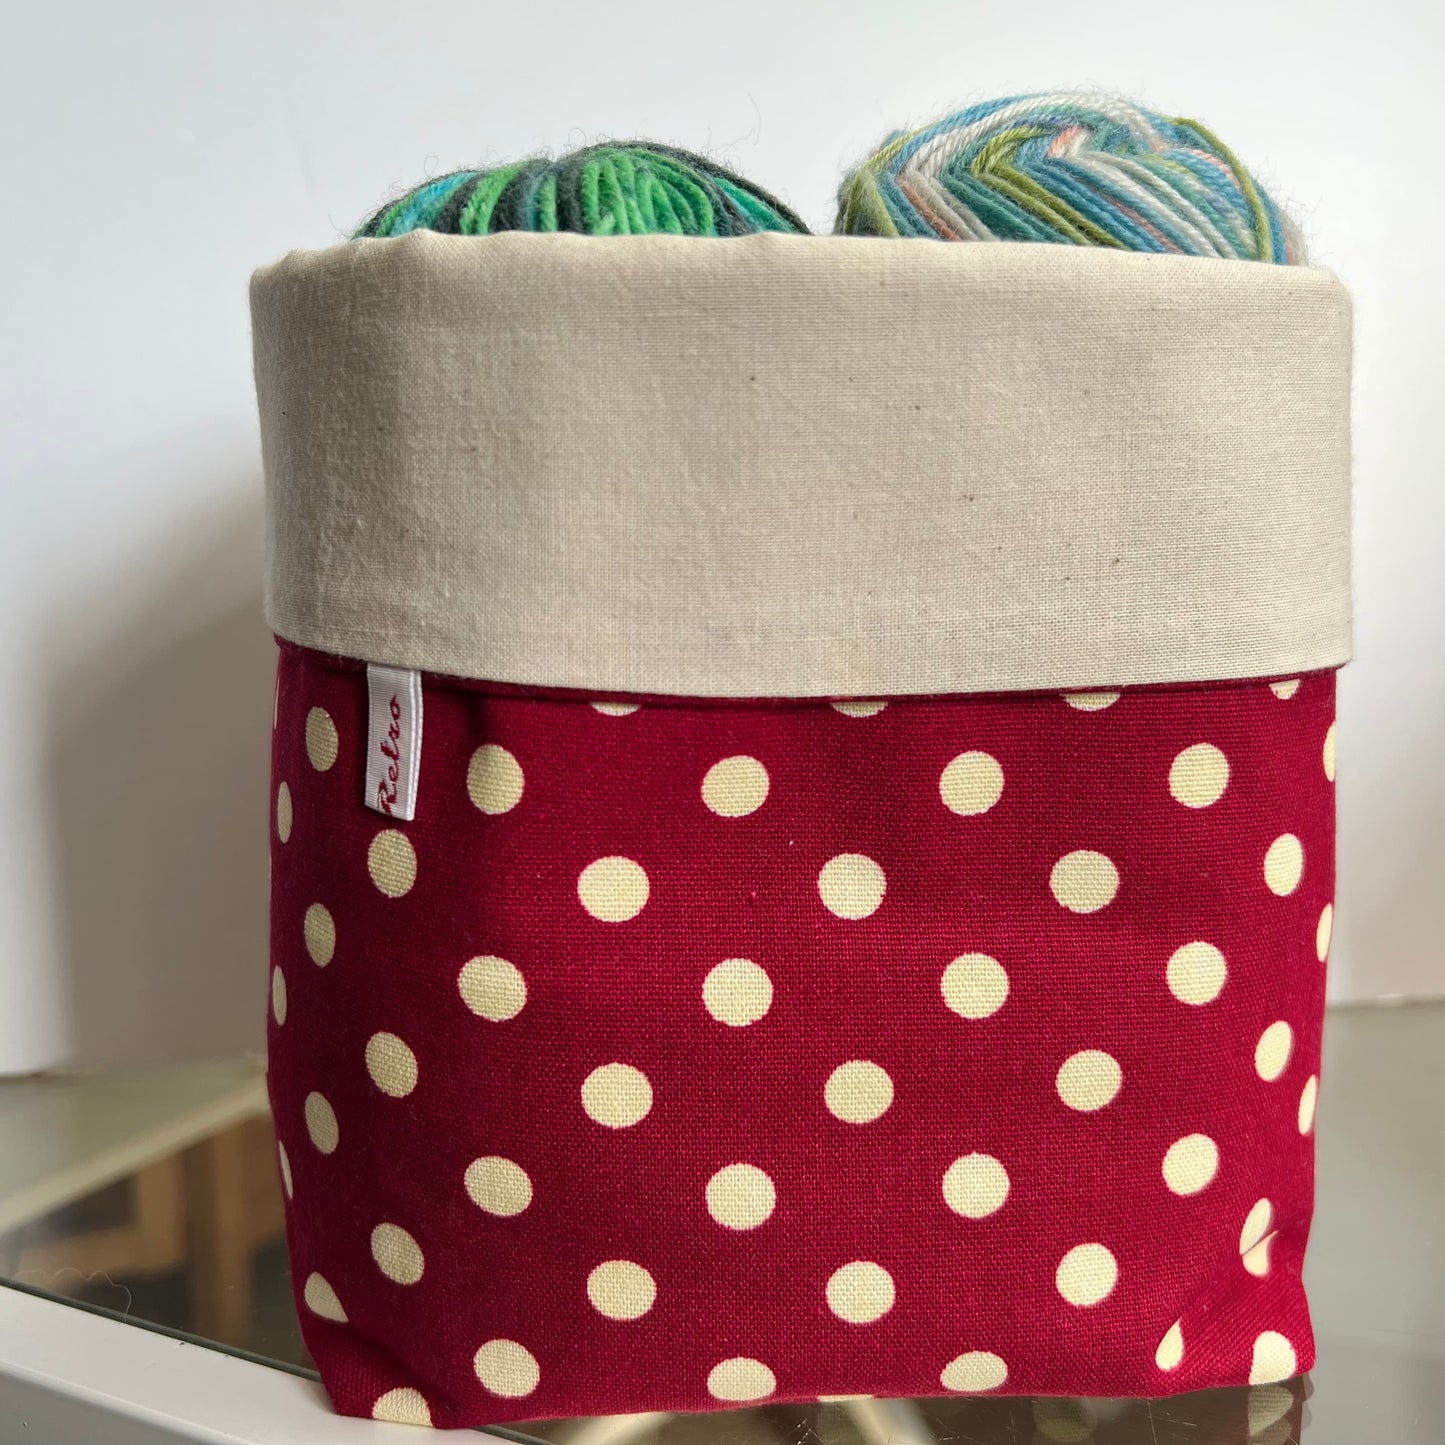 Storage basket, Craft tub for Knitting and Crochet Projects- Spring Collection